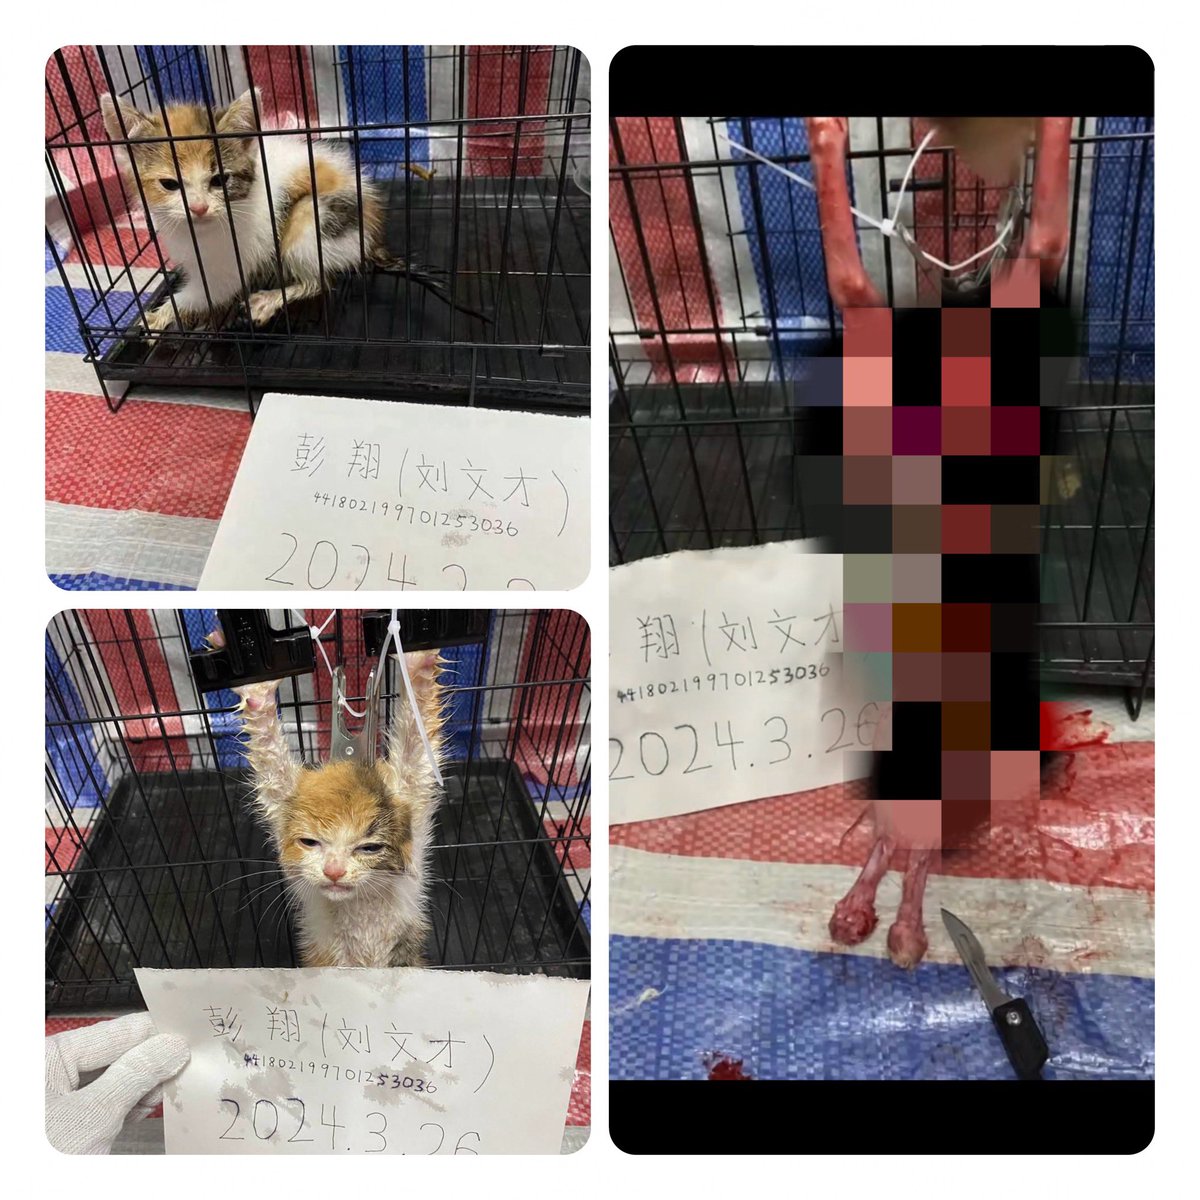 Hey, this kitten was skinned alive by the Chinese and killed after being electrically tortured for over four hours, can we go sightseeing at the killer's house?
#ChinaFact
#BoycottChina
#CatKillerChinese
#AnimalAbuserChinese
#StopChinaCatTorture 
#中国猫哀悼 
#中国猫虐待グループ